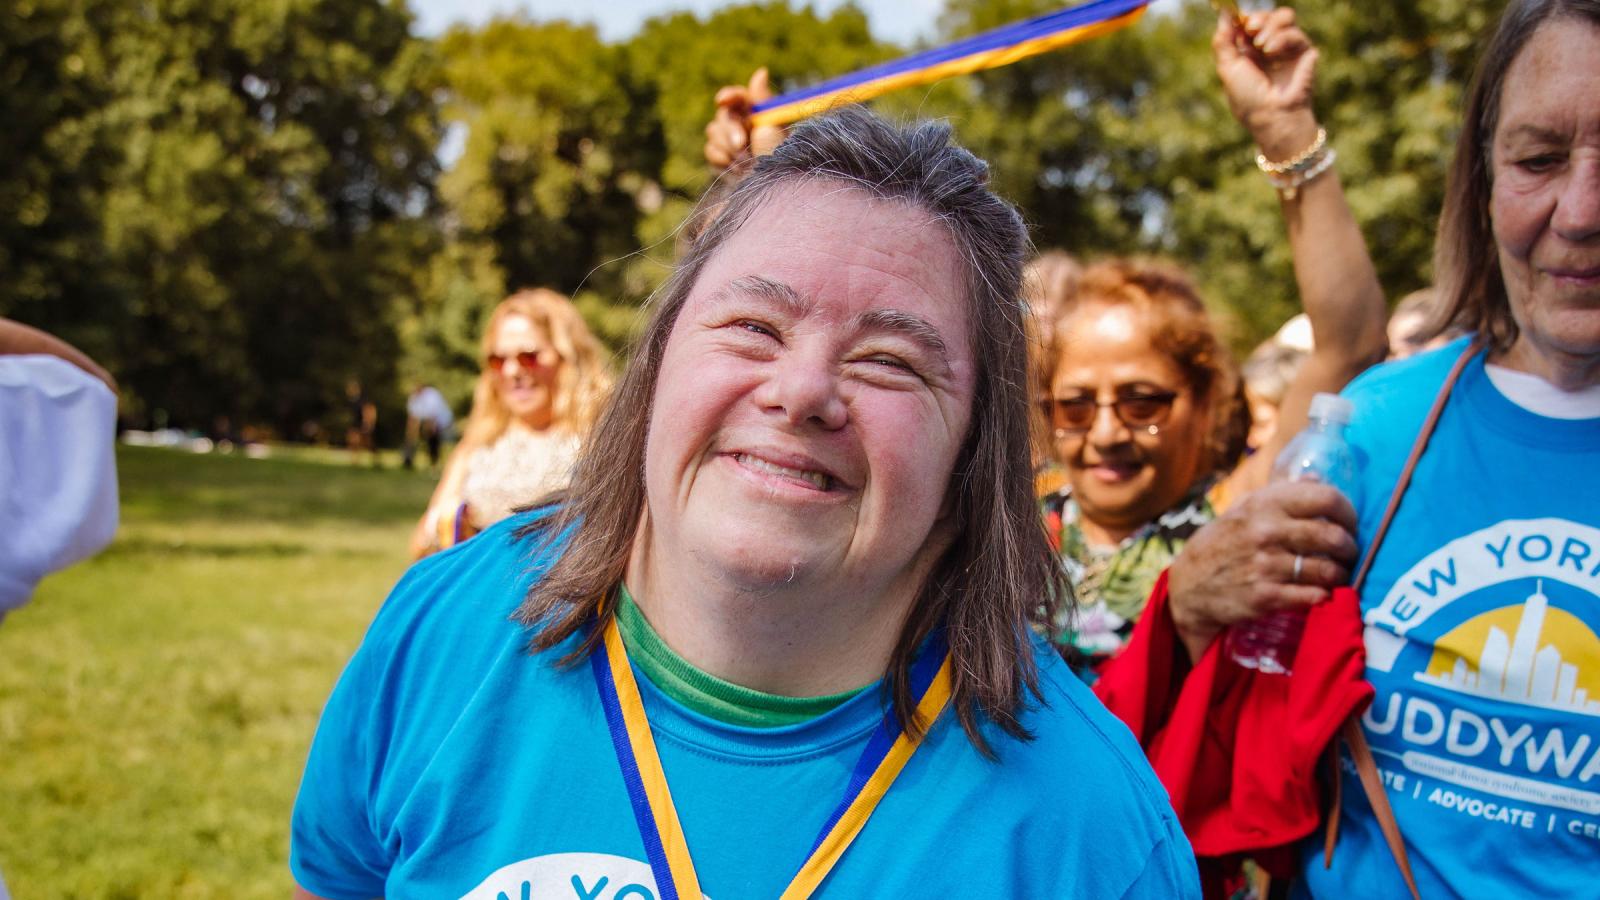 Adult Woman with Down syndrome smiling